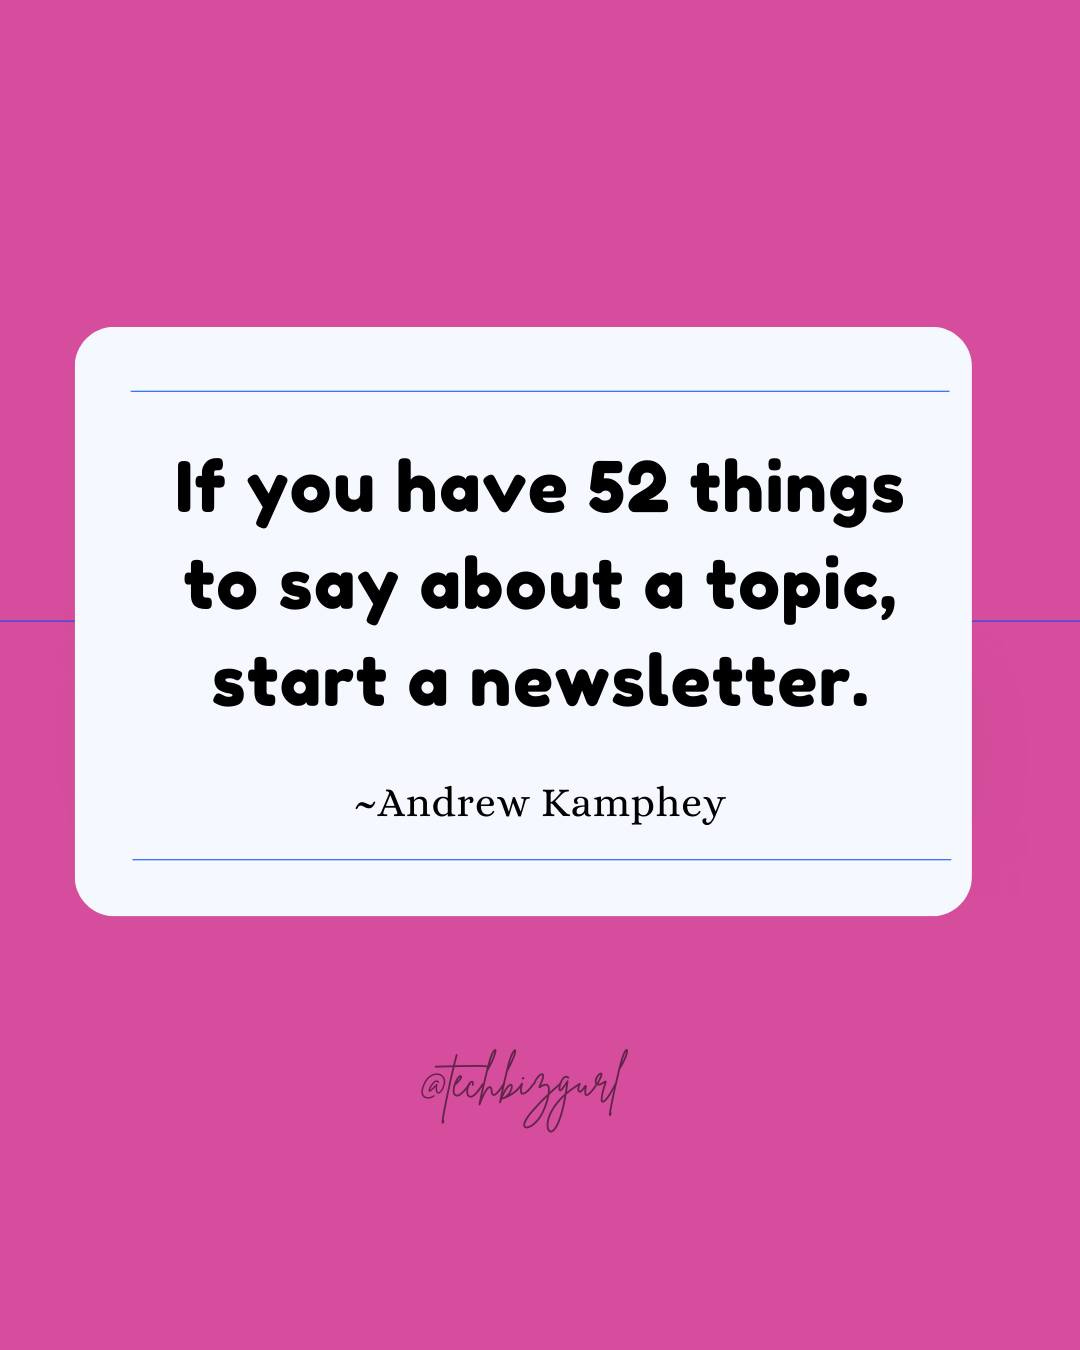 May be a graphic of text that says 'If you have 52 things to say about topic, start a newsletter. ~Andrew Kamphey @tekbuzgarl'